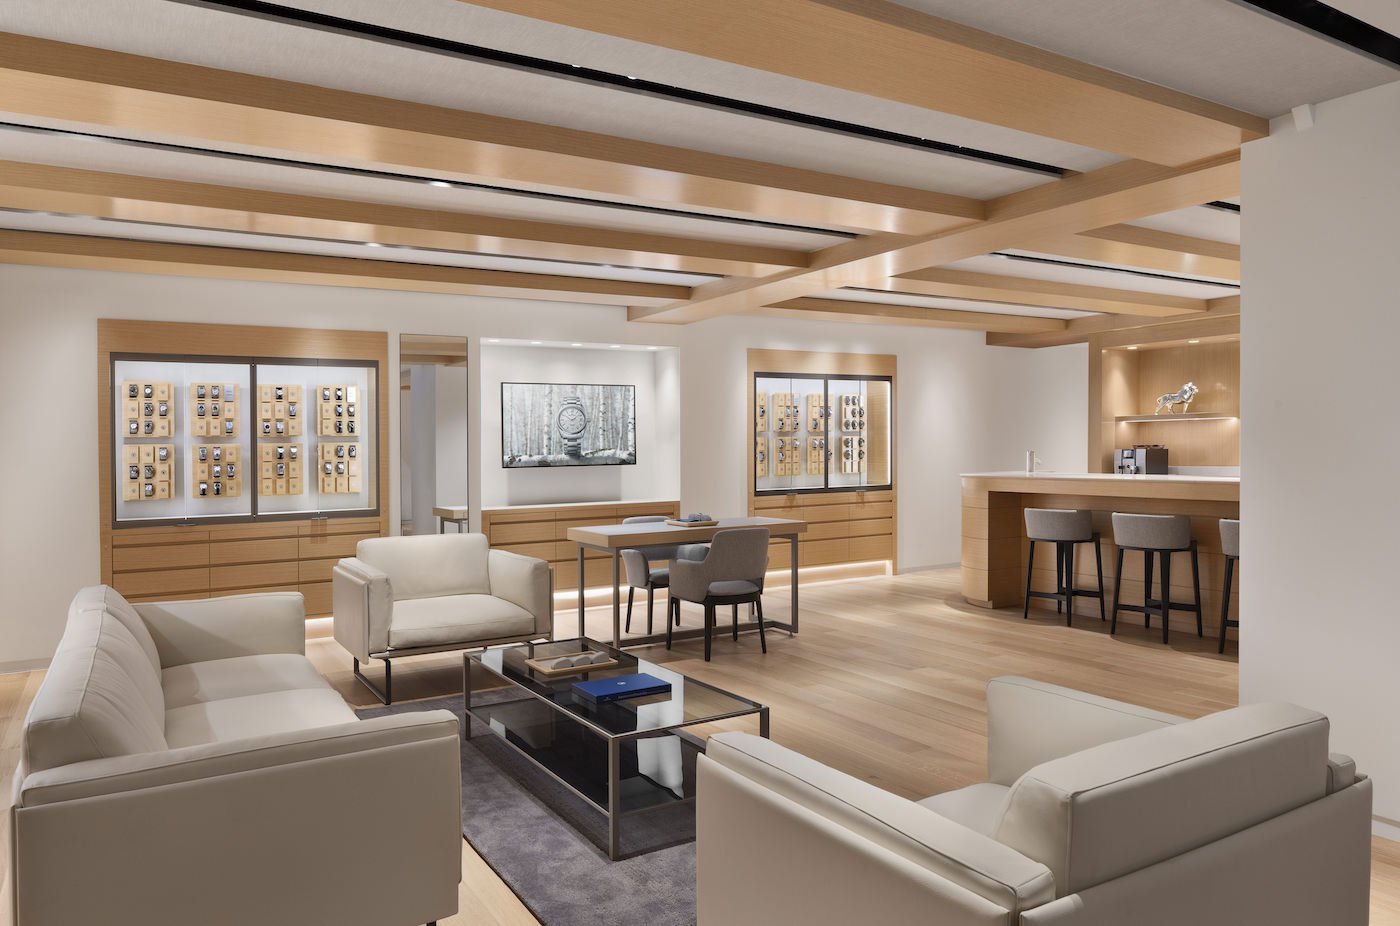 Grand Seiko opens largest flagship boutique in New York